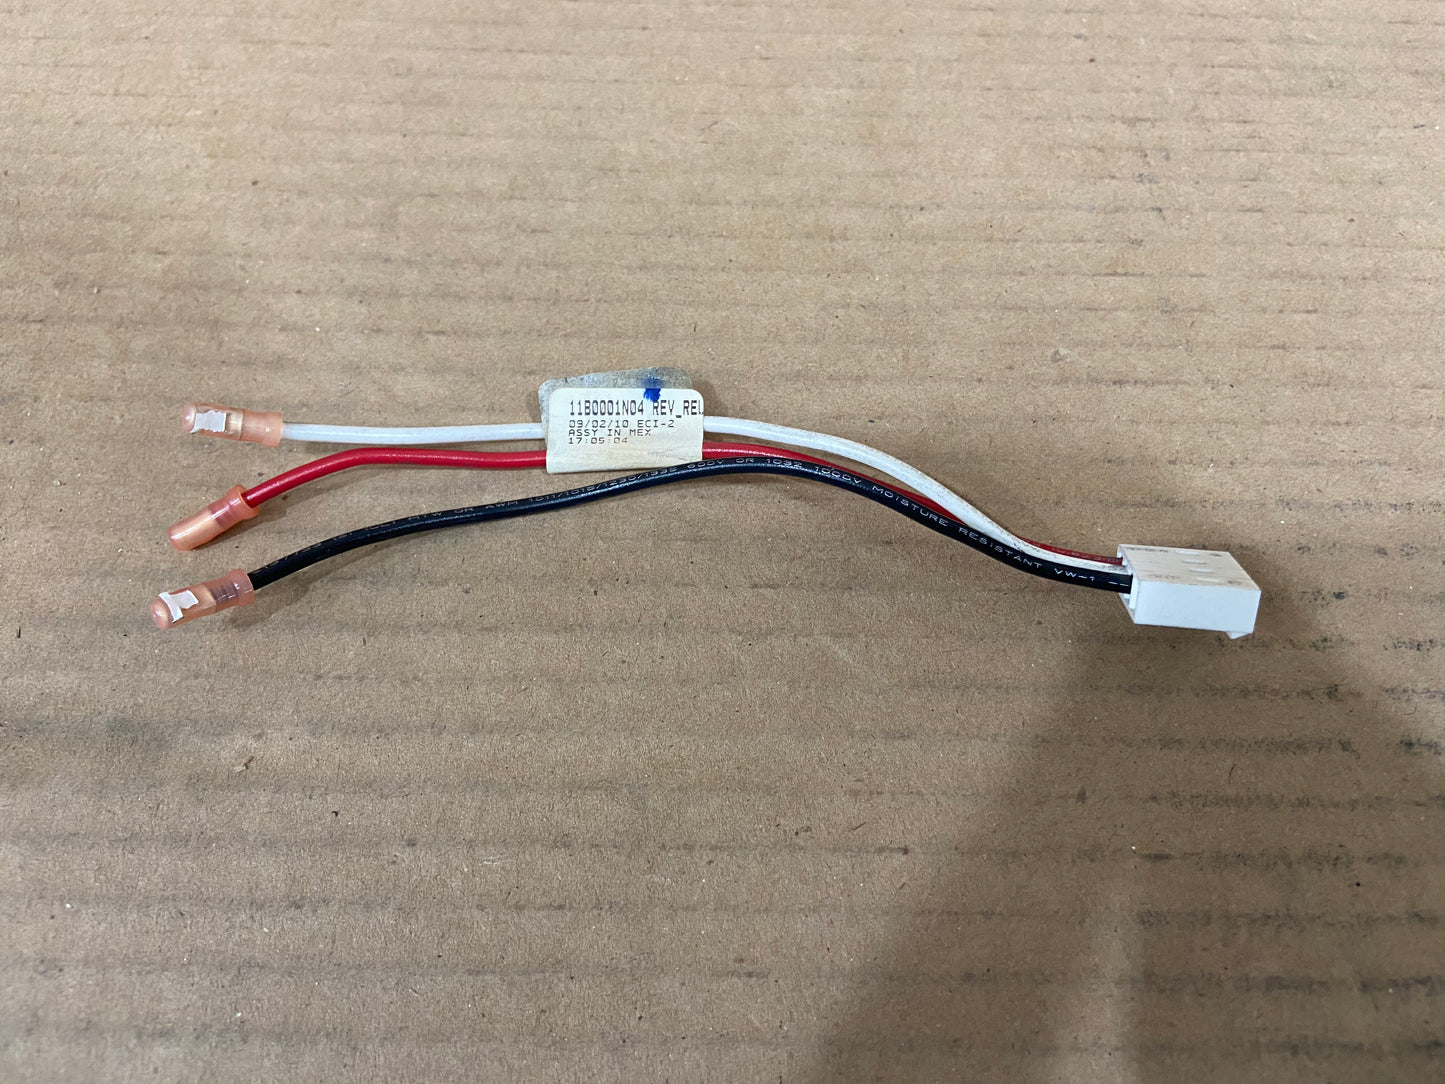 PREMIER LINK WIRING HARNESS, sold individually